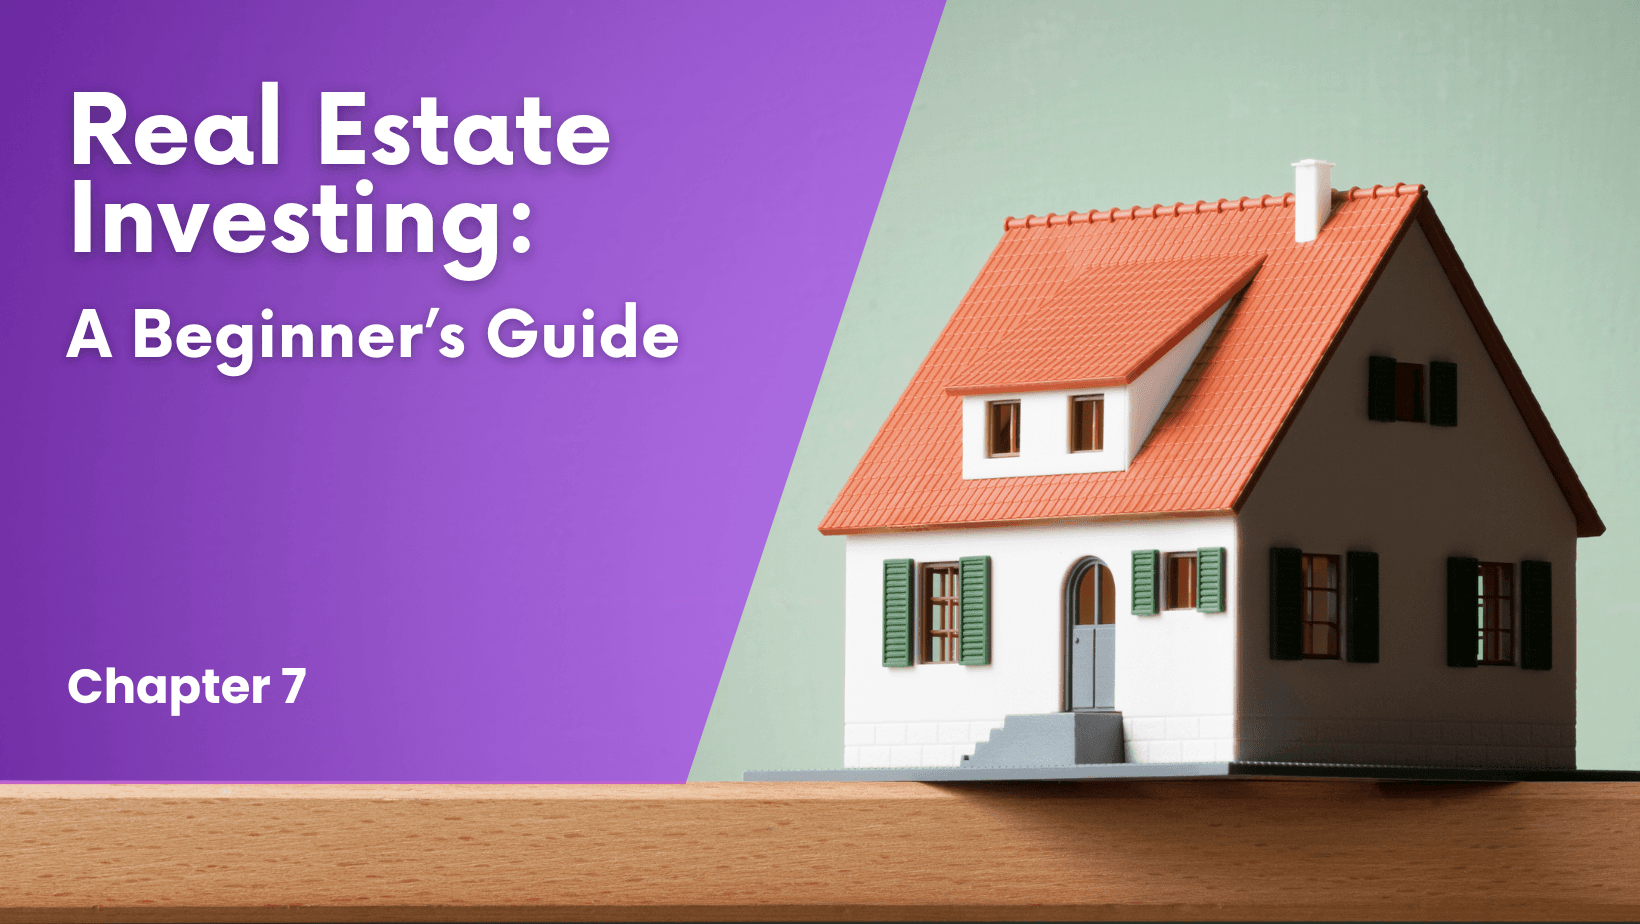 Chapter 7: Making Your Real Estate Purchase